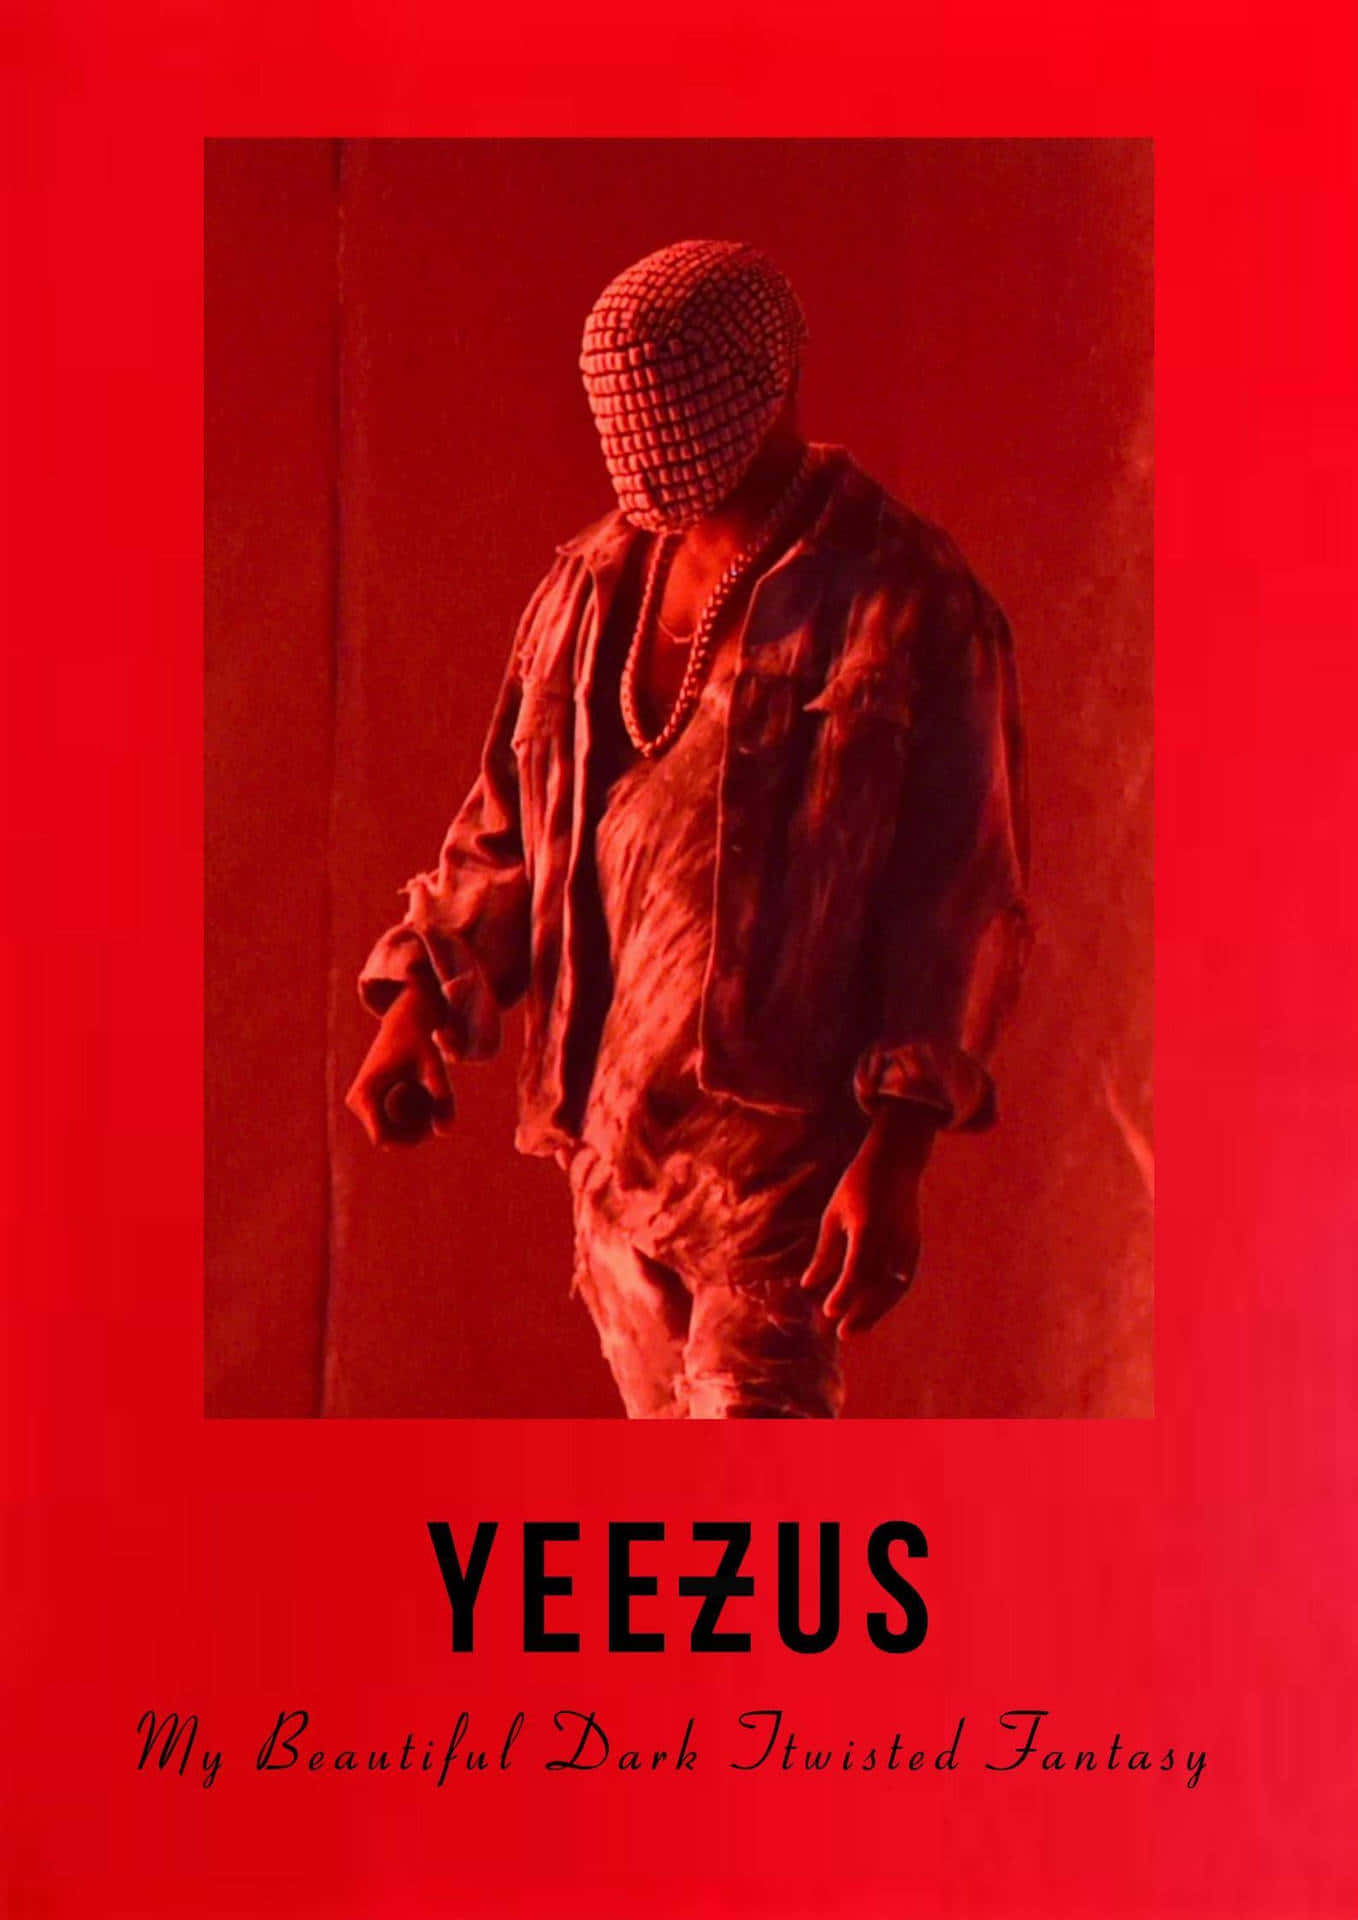 YEEZUS Tour Phone UPDATED Kanye West  for your  Mobile  Tablet  Explore Yeezus  Kanye West iPhone  Kanye West Kanye West Concert HD  wallpaper  Pxfuel